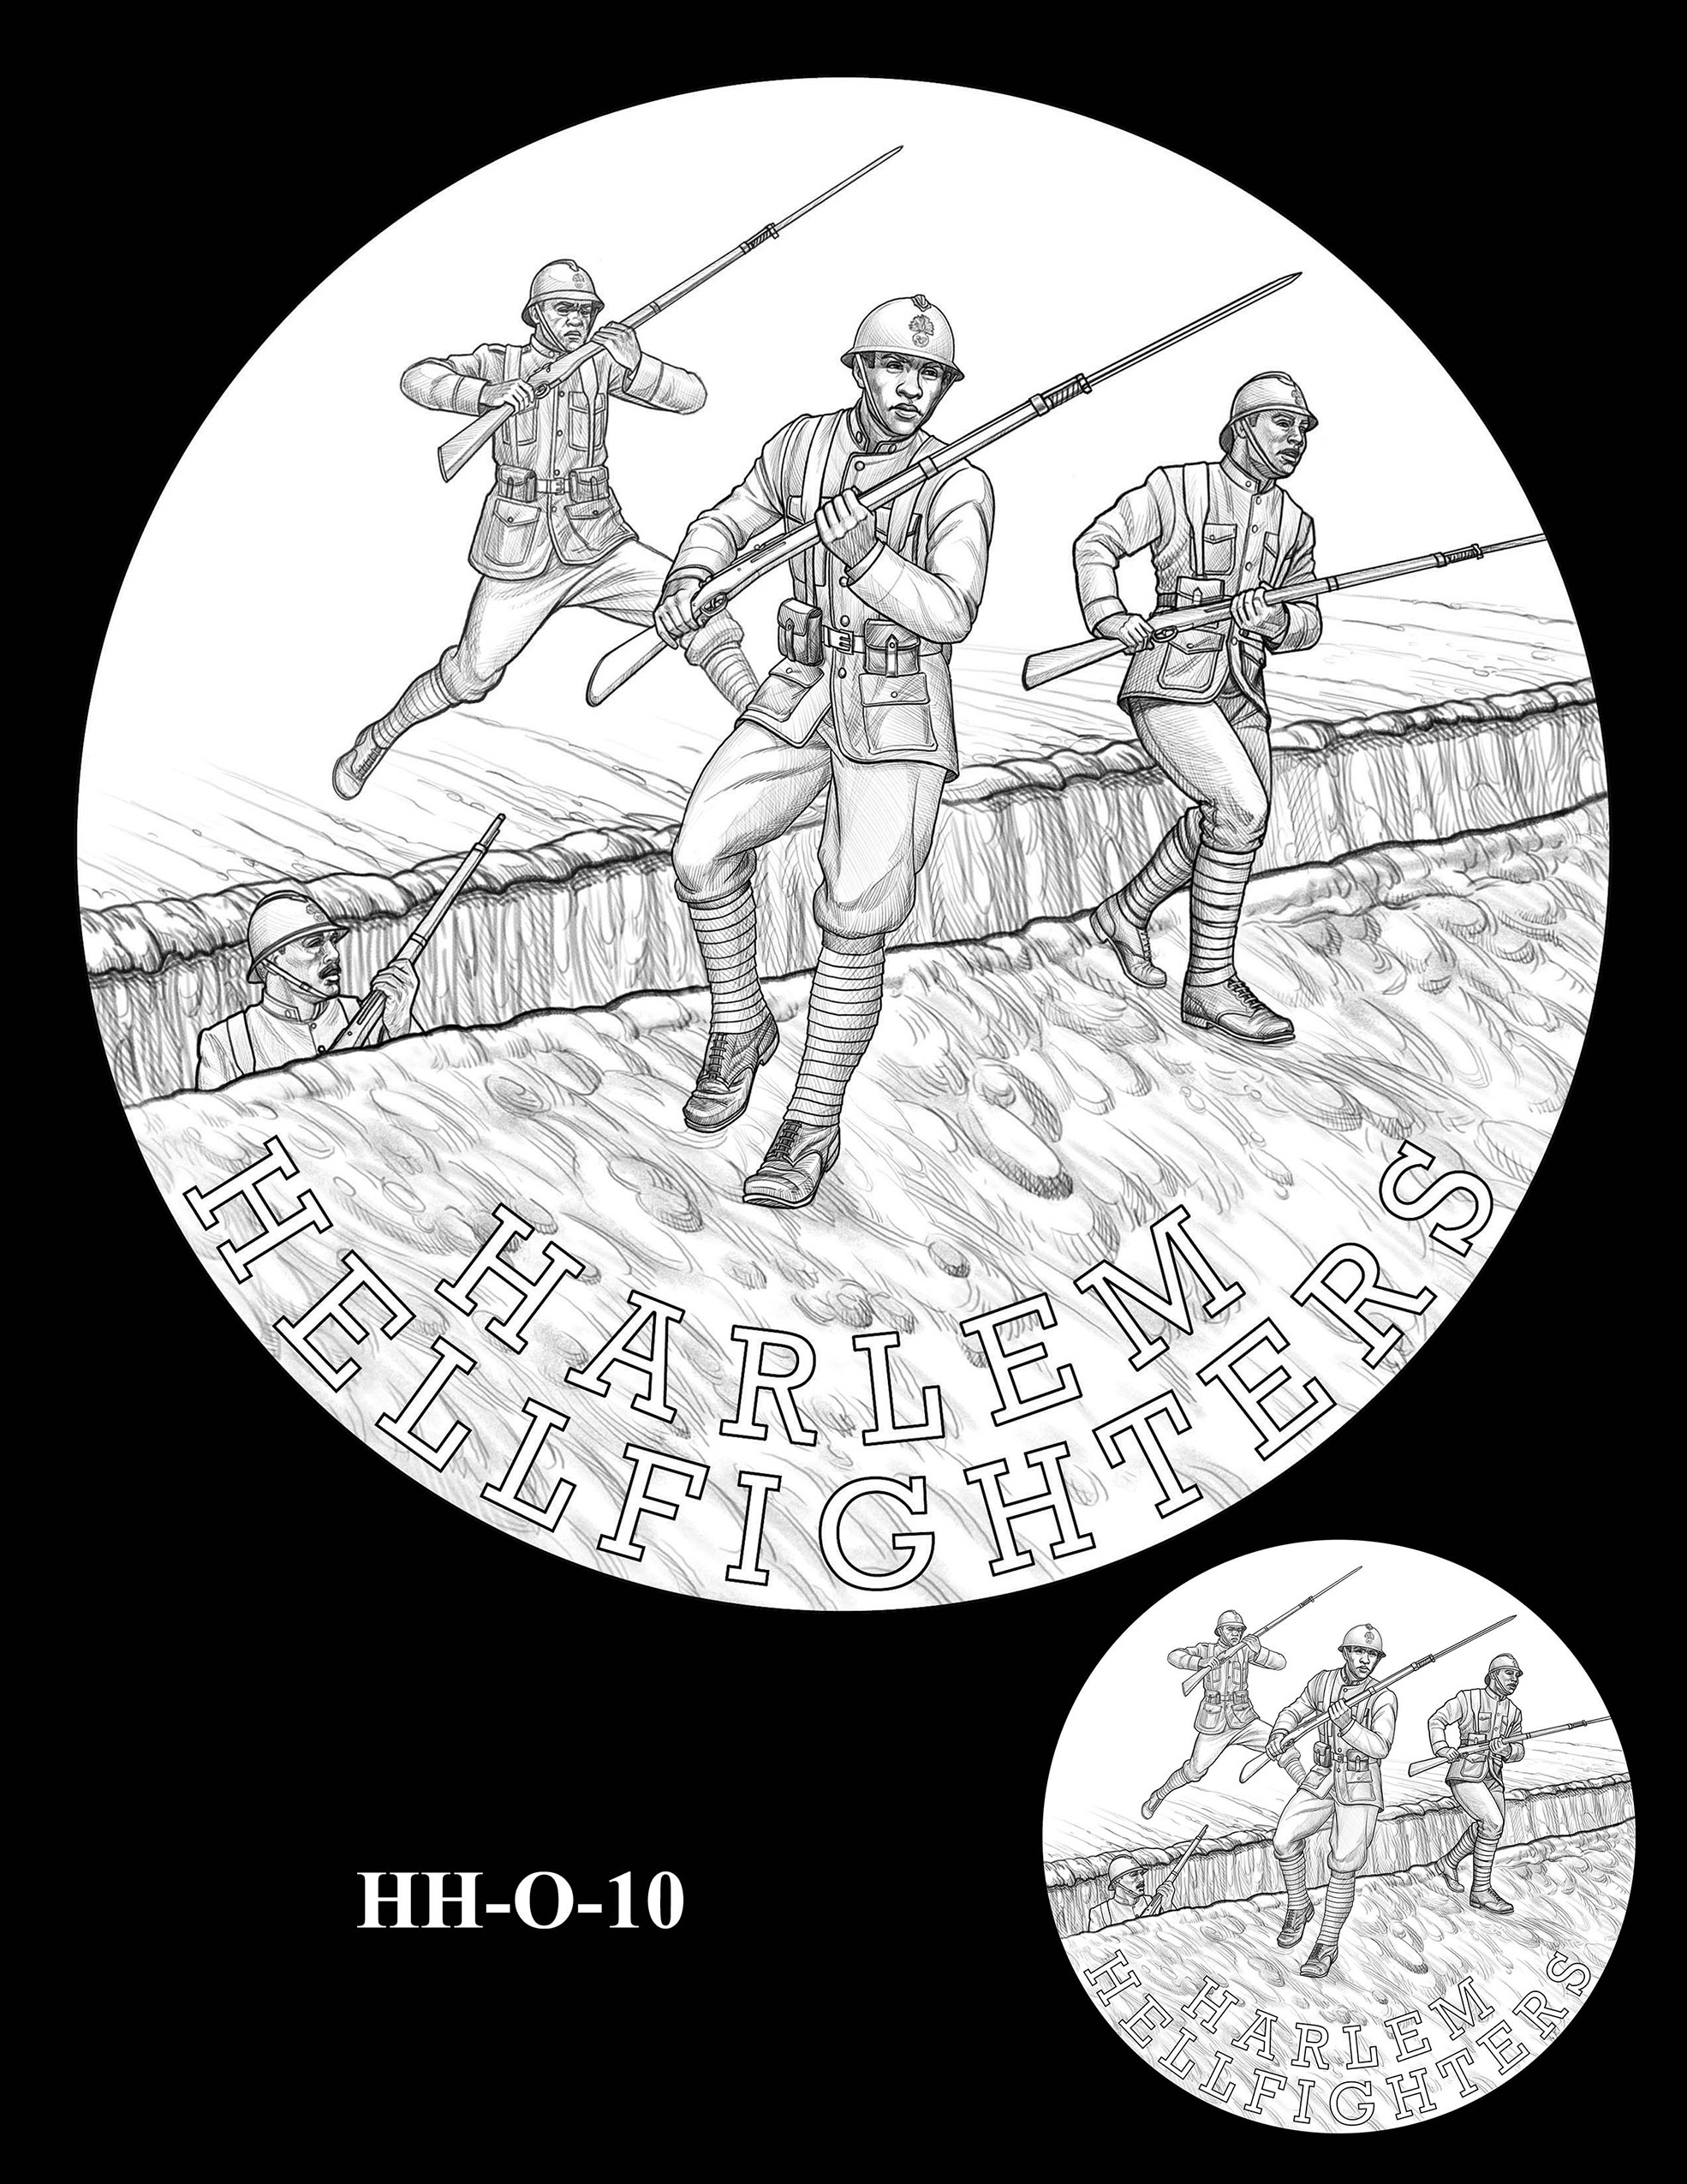 HH-O-10 -- Harlem Hellfighters Congressional Gold Medal